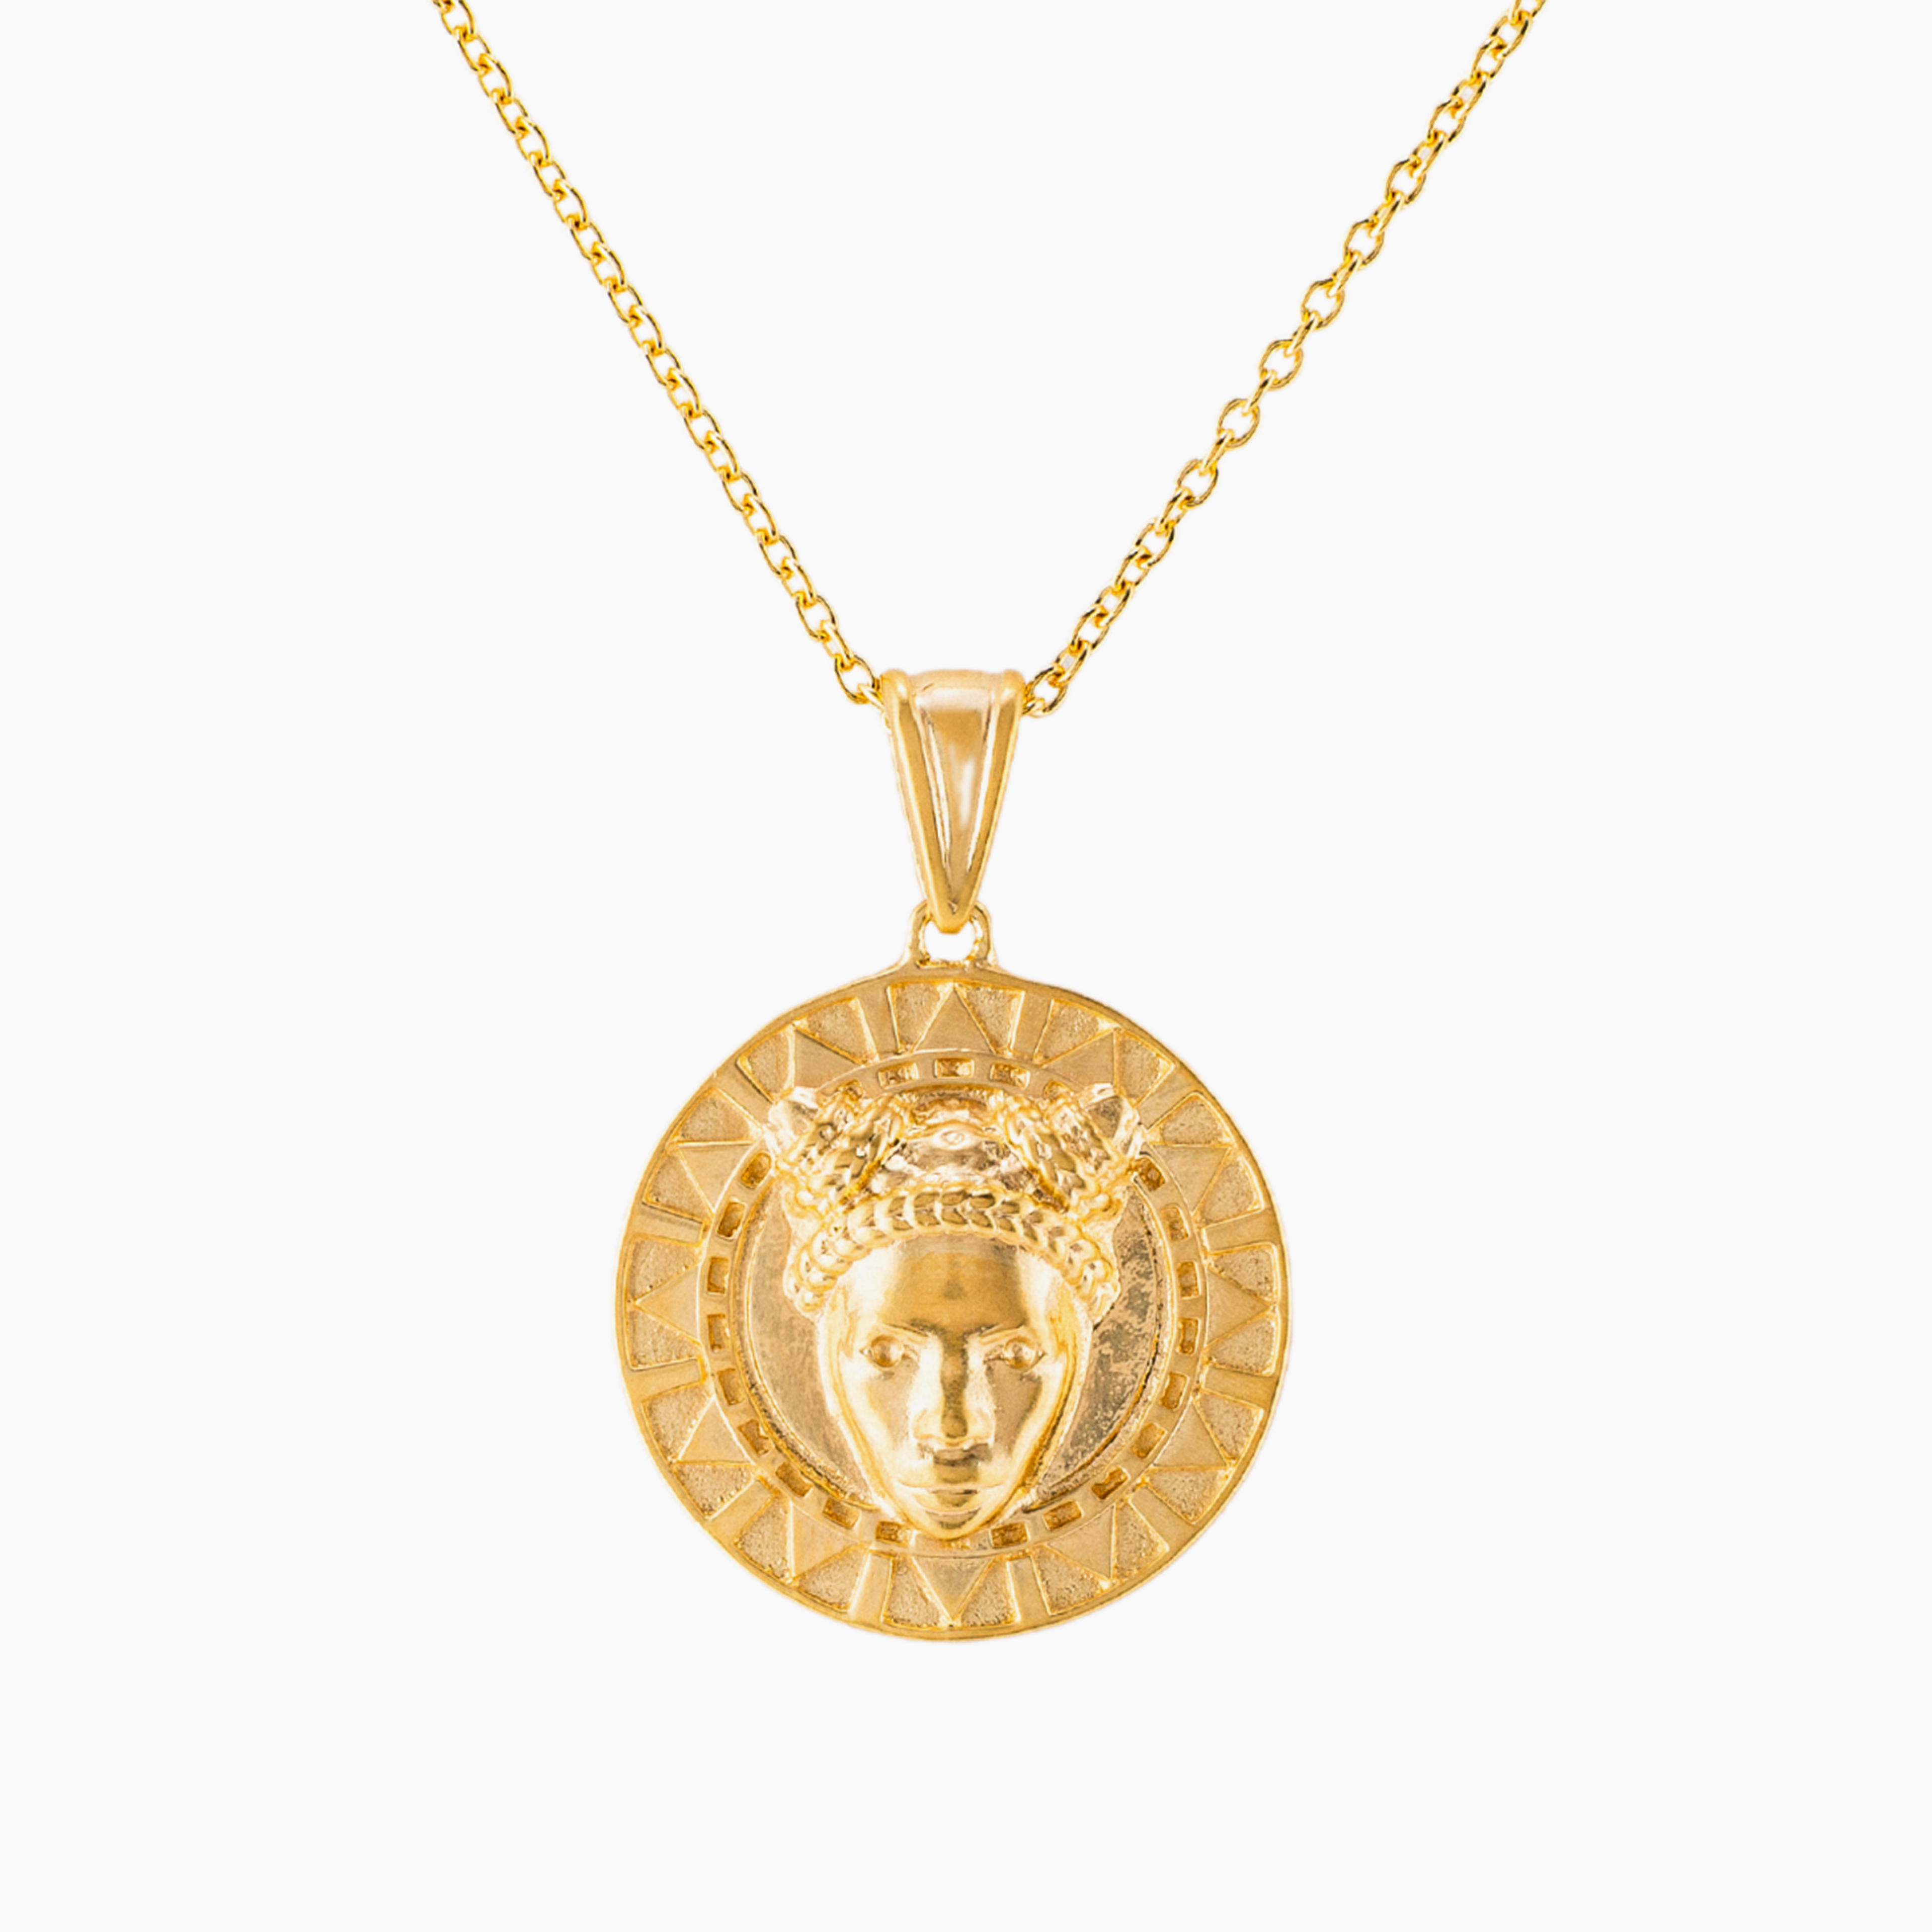 Reava Coin Necklace in 14K Gold with Light Polish